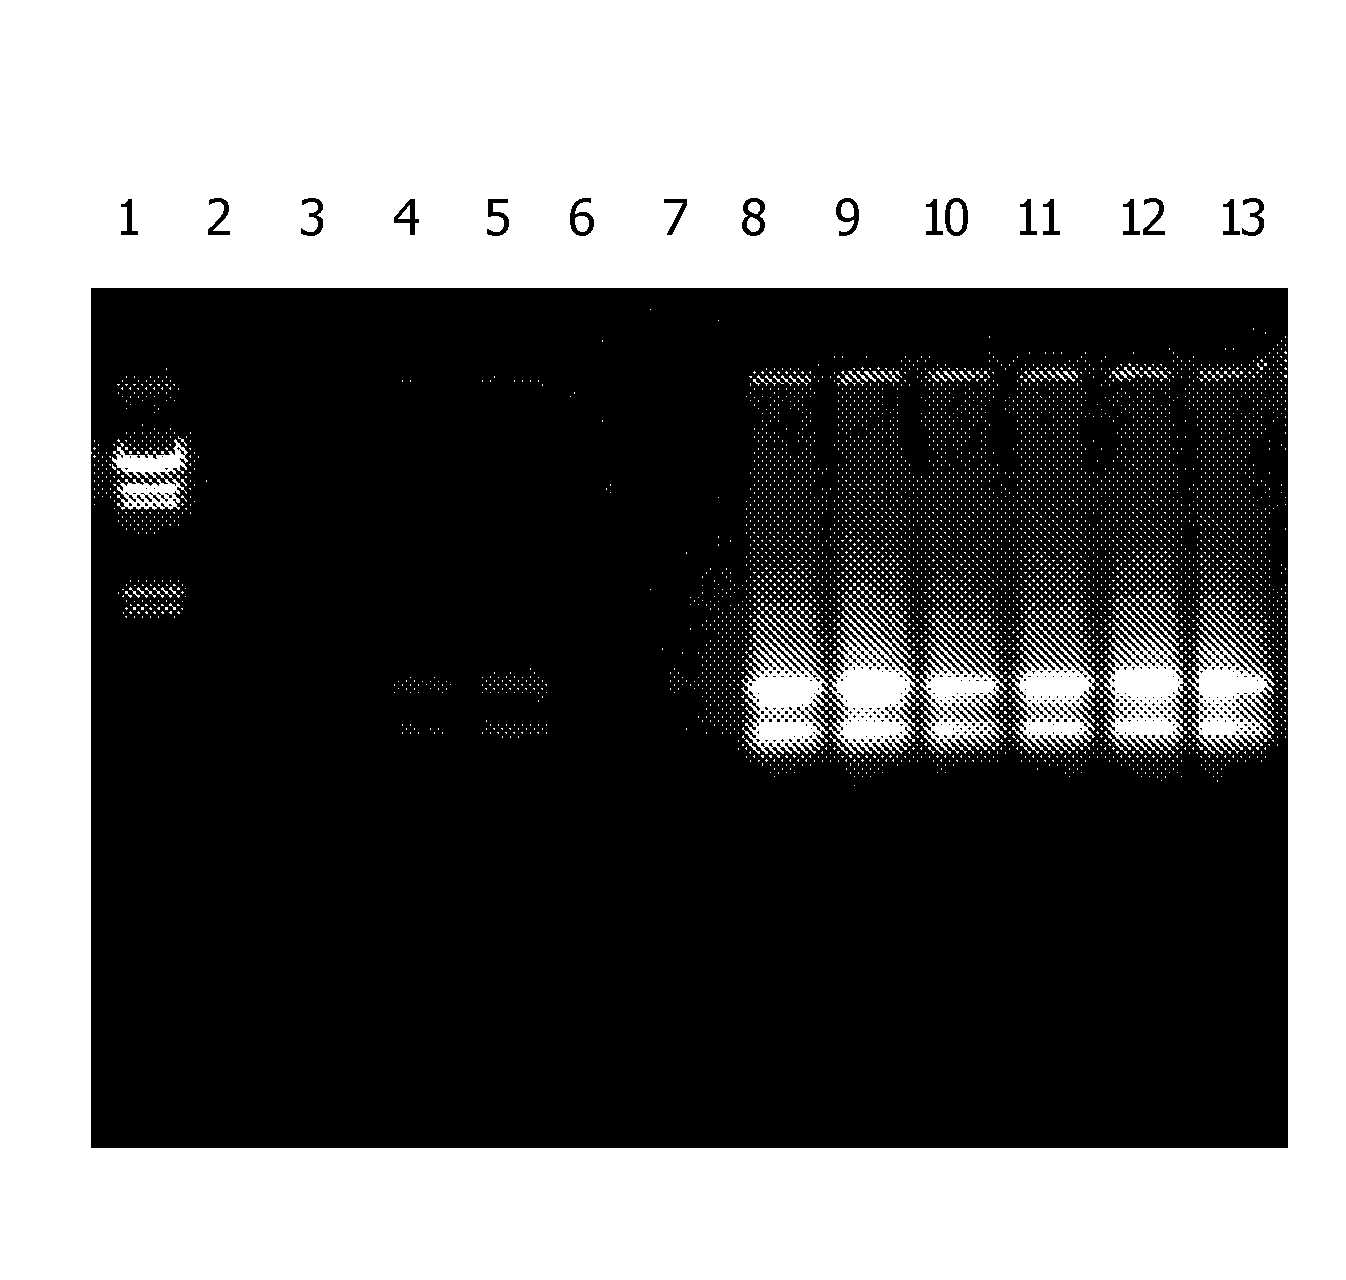 Method for the Isolation of RNA from Biological Sources